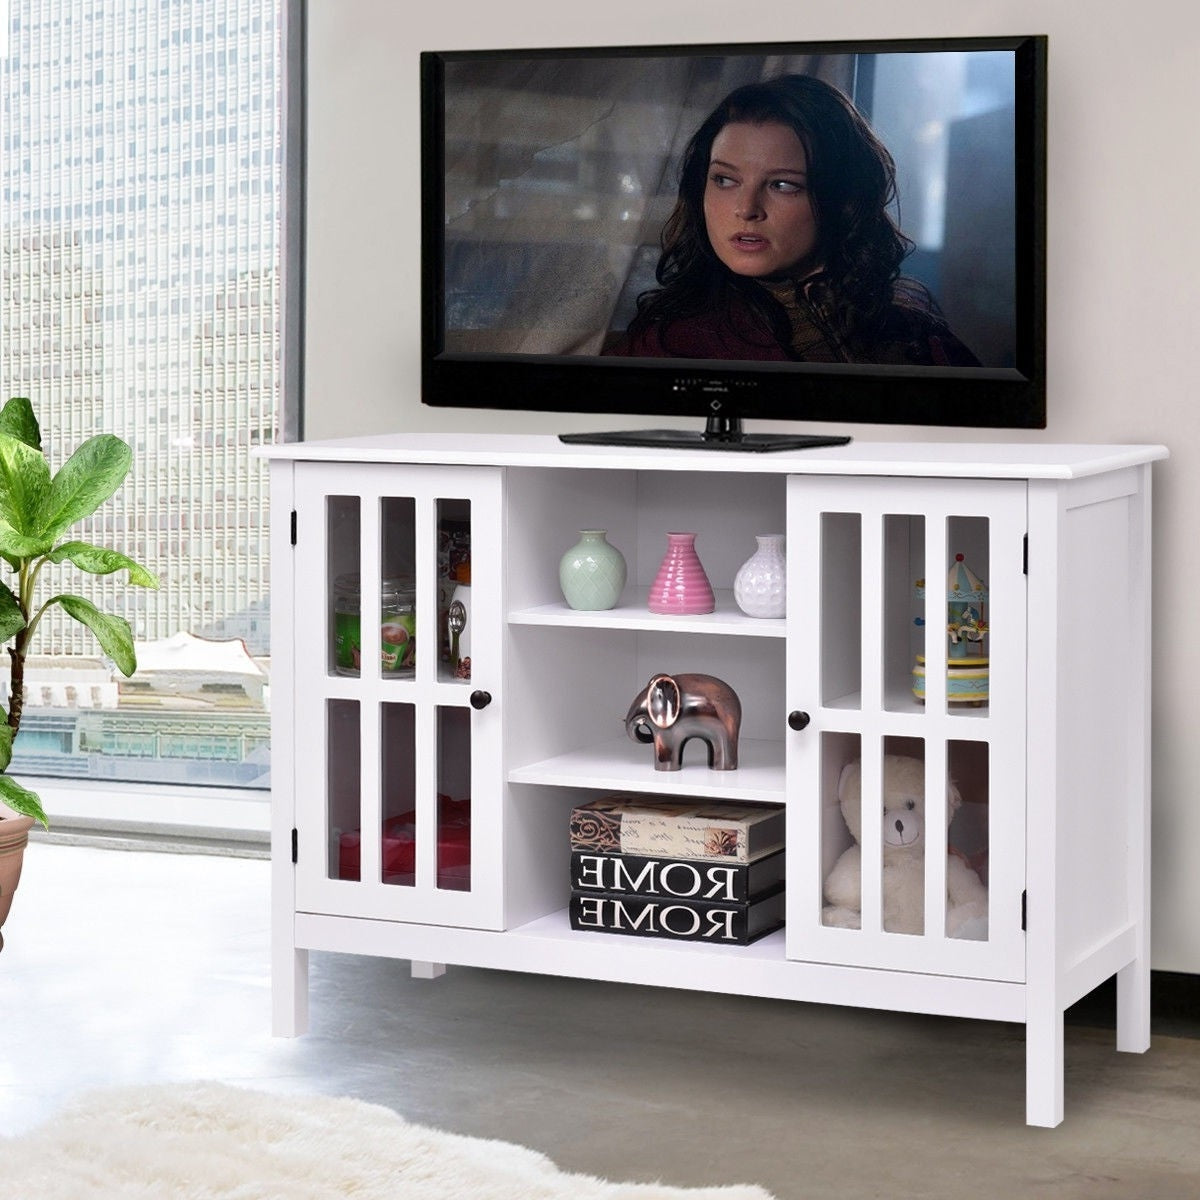 Living Room > TV Stands And Entertainment Centers - White Wood 43-inch TV Stand With Glass Panel Doors